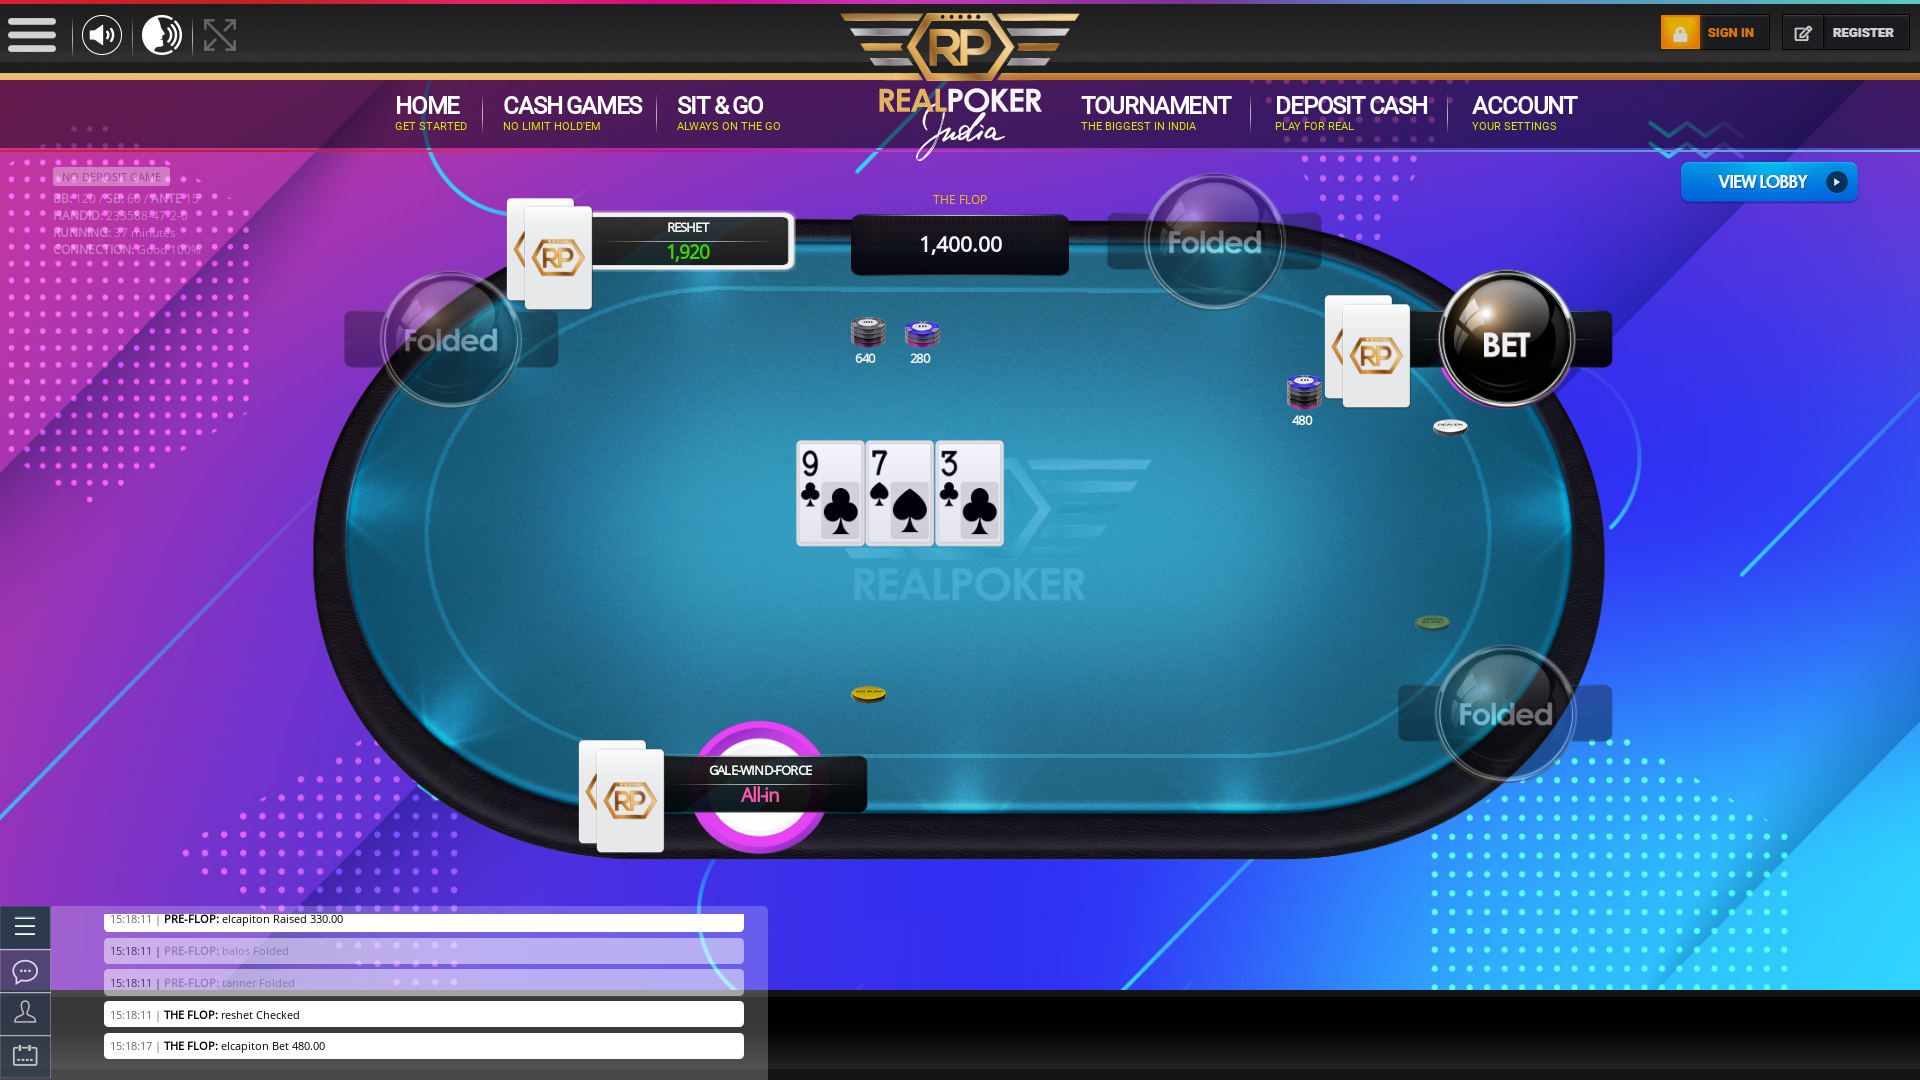 Indian online poker on a 10 player table in the 37th minute match up